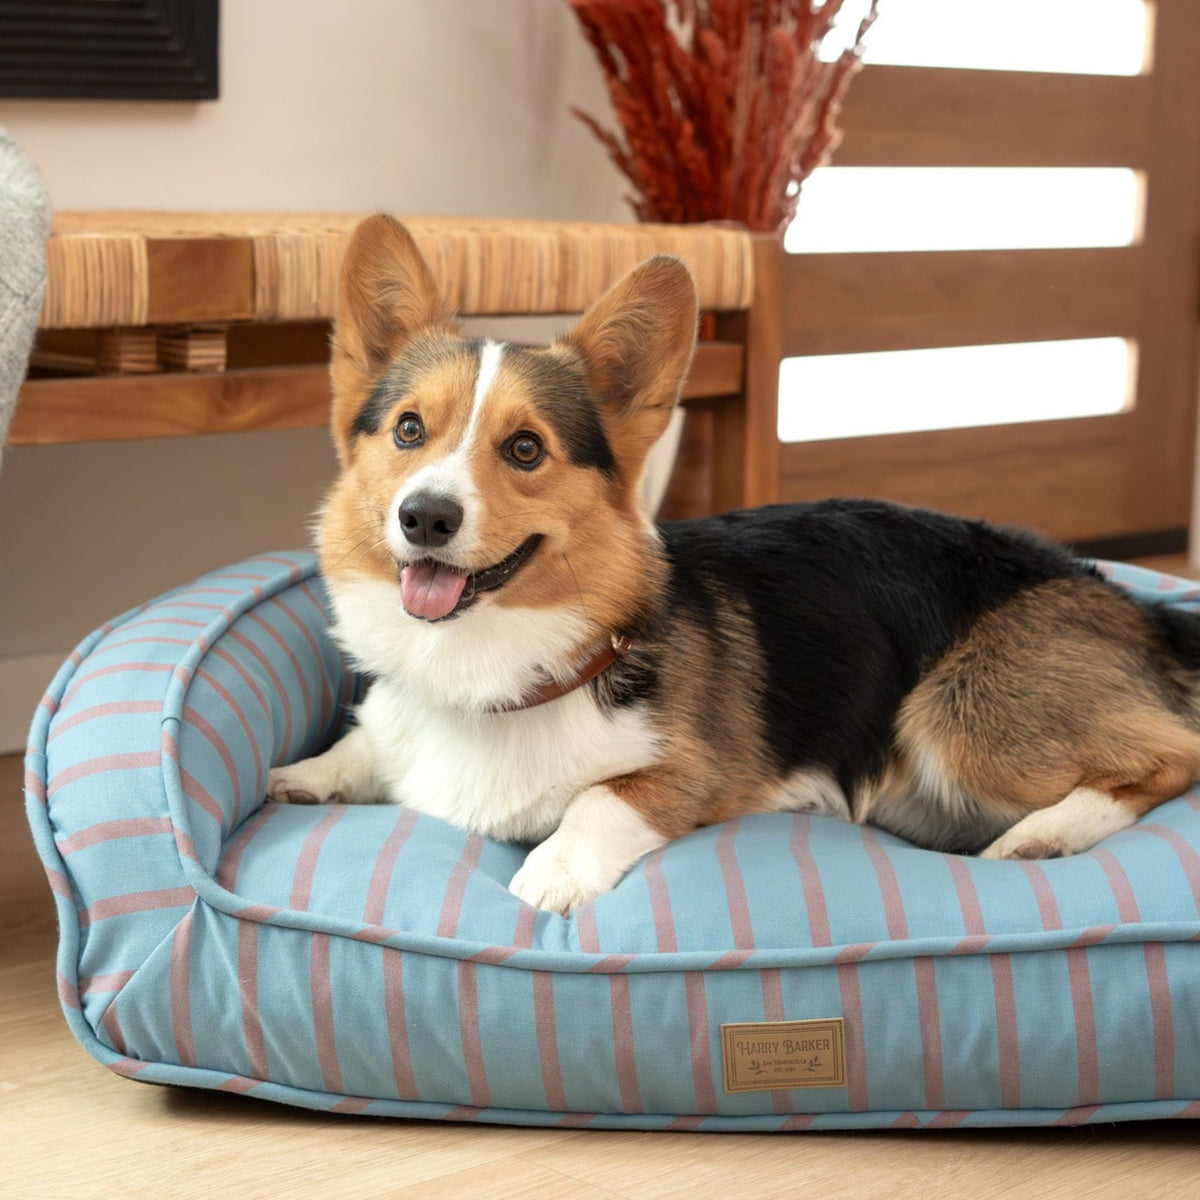 Striped Ortho Lounger Pet Bed